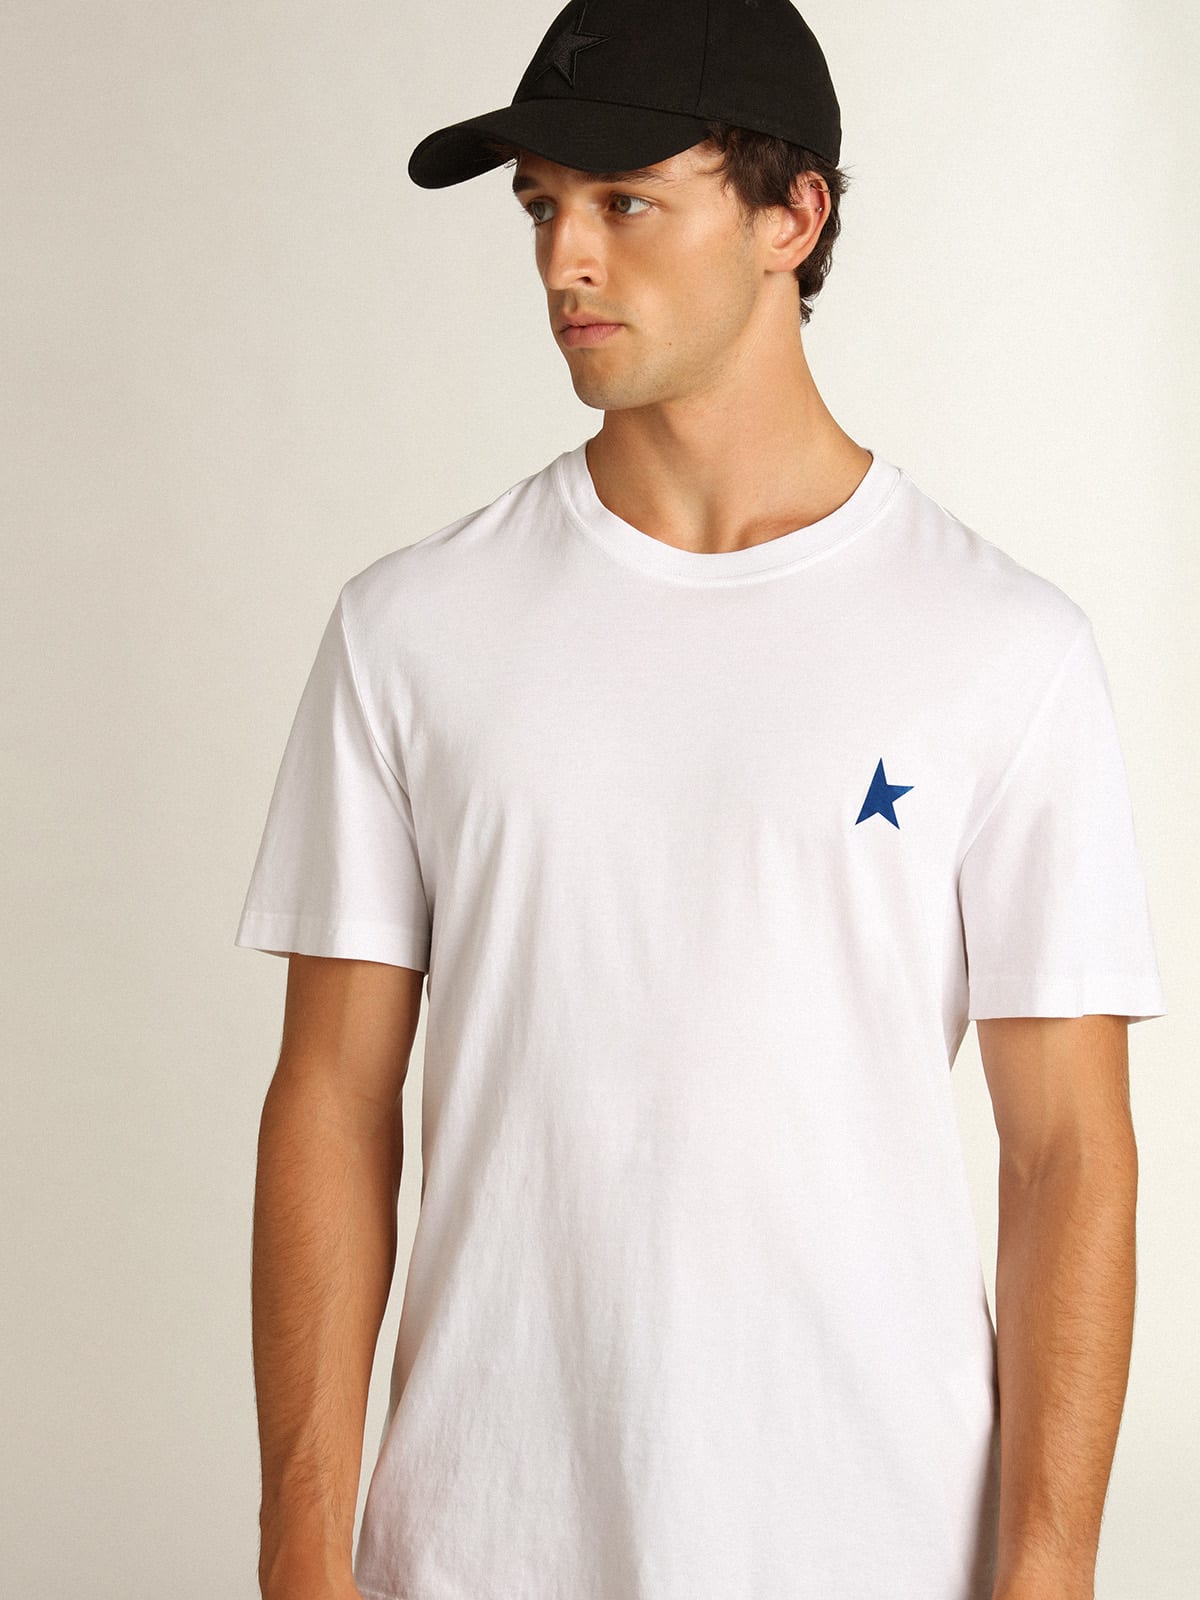 Men's white T-shirt with blue star on the front